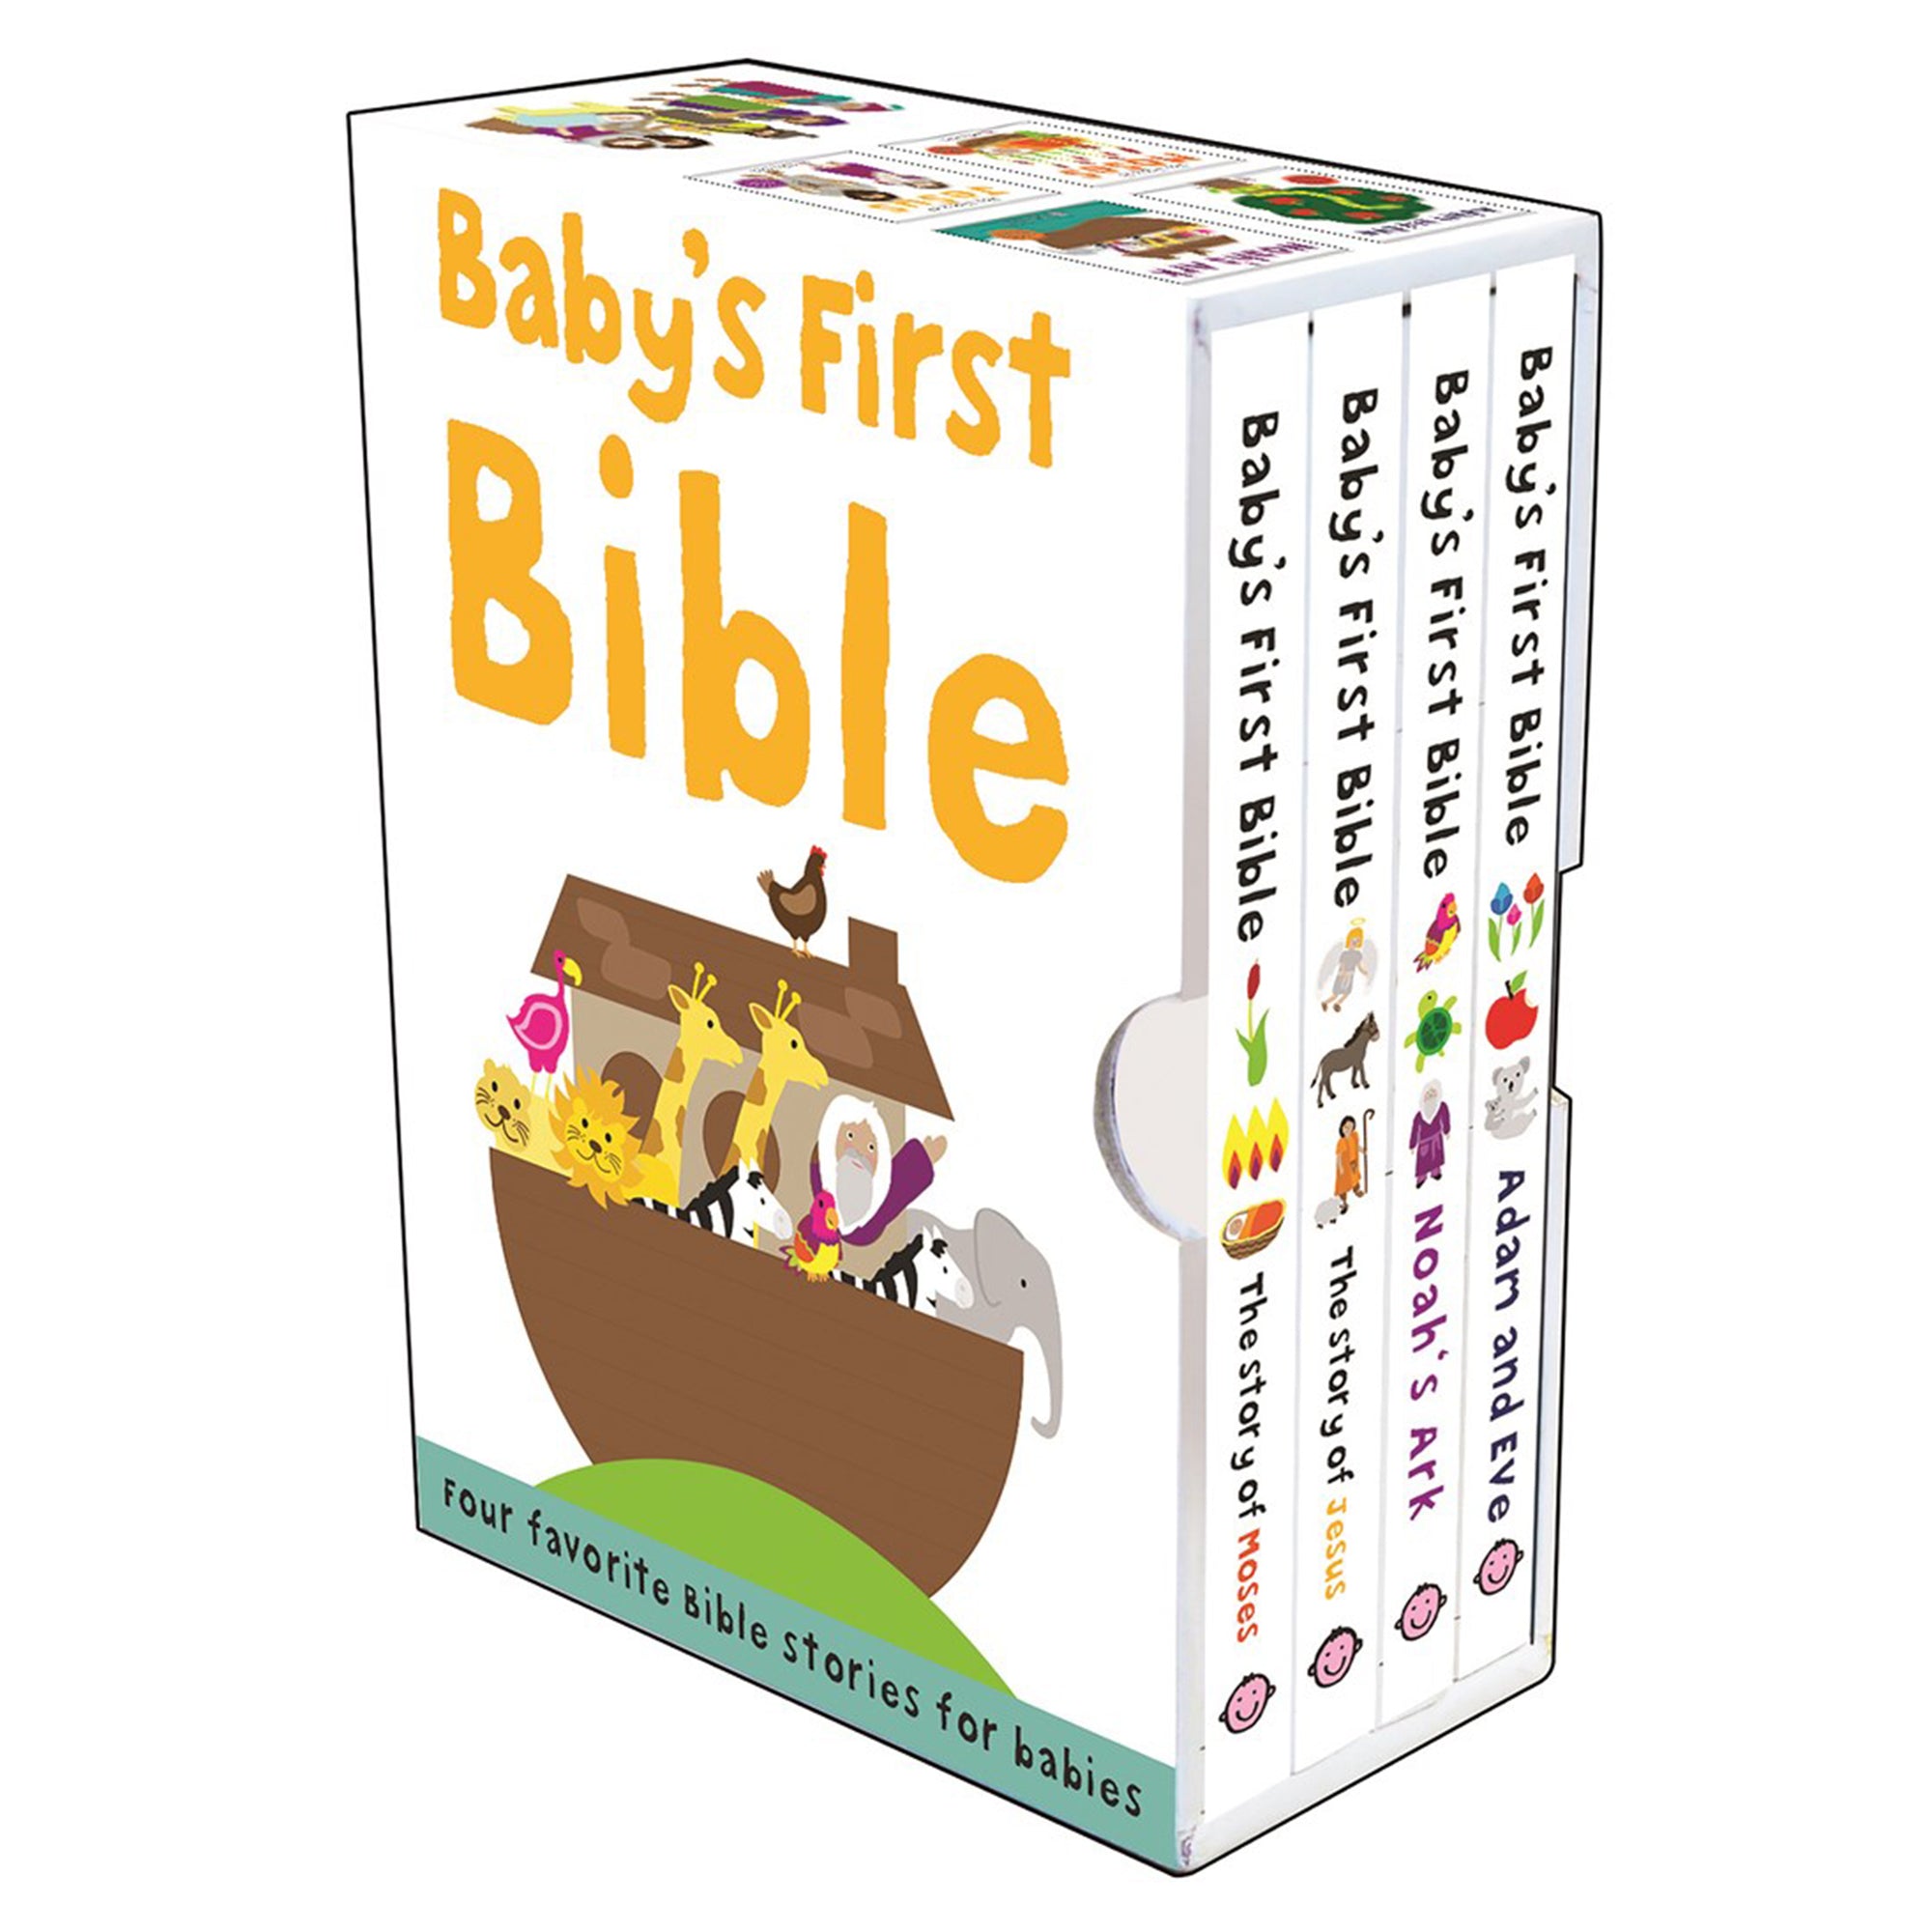 Baby's First Bible Stories Boxed Set